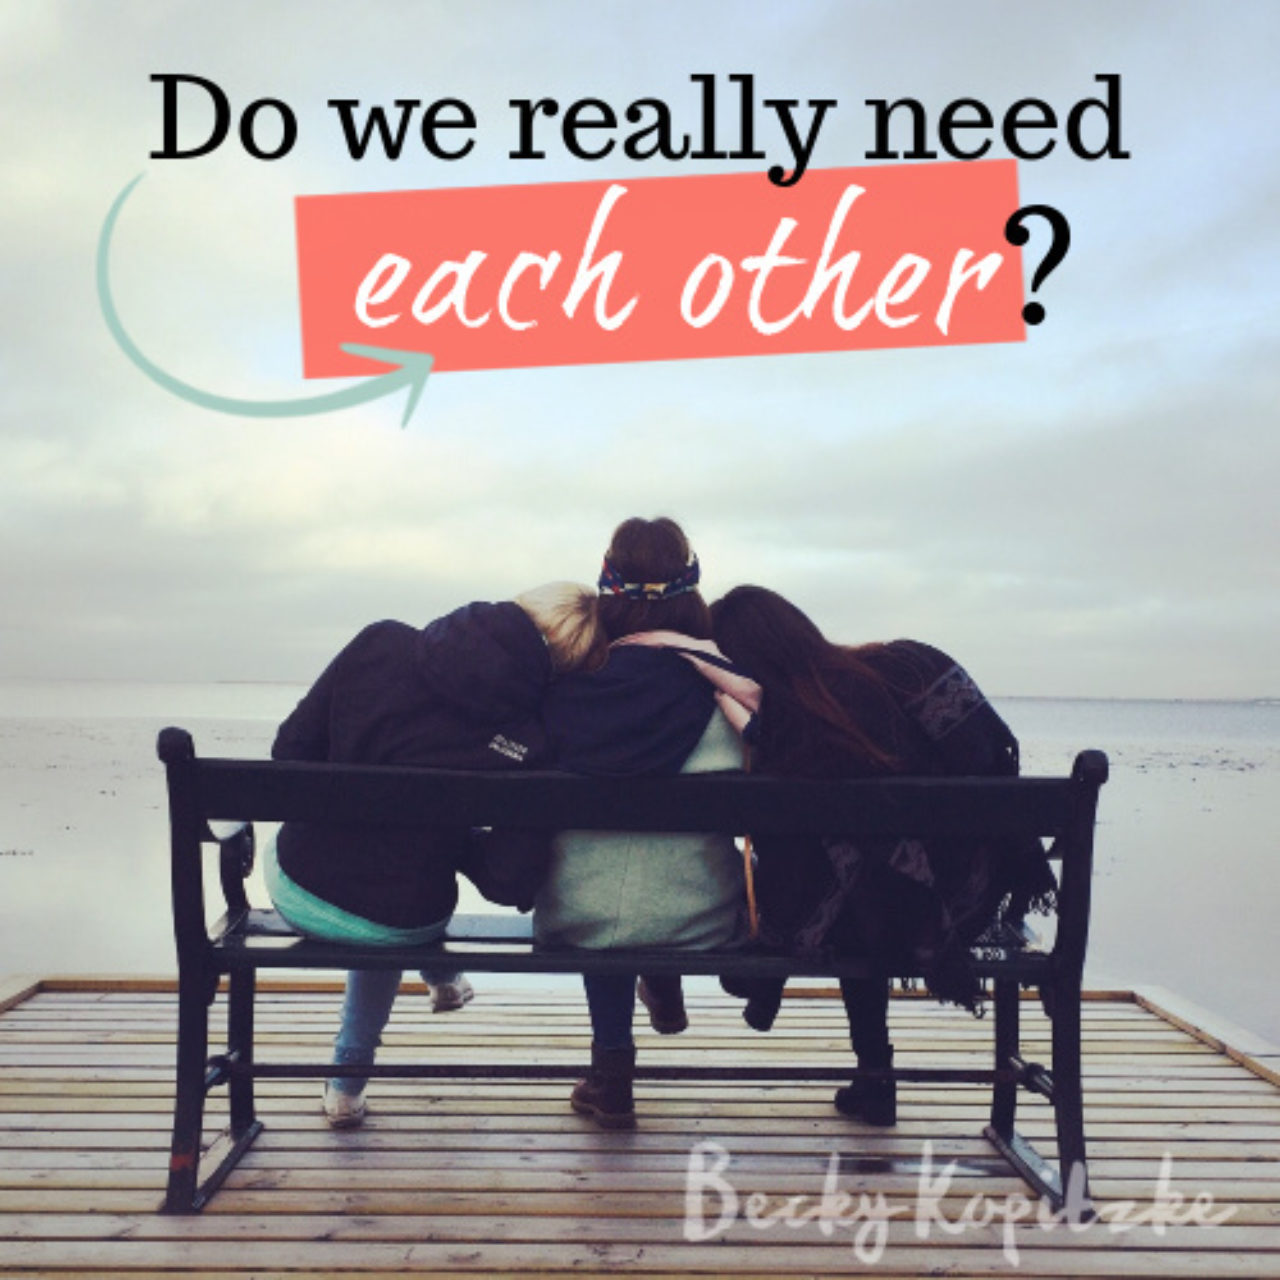 Do We Really Need Each Other?